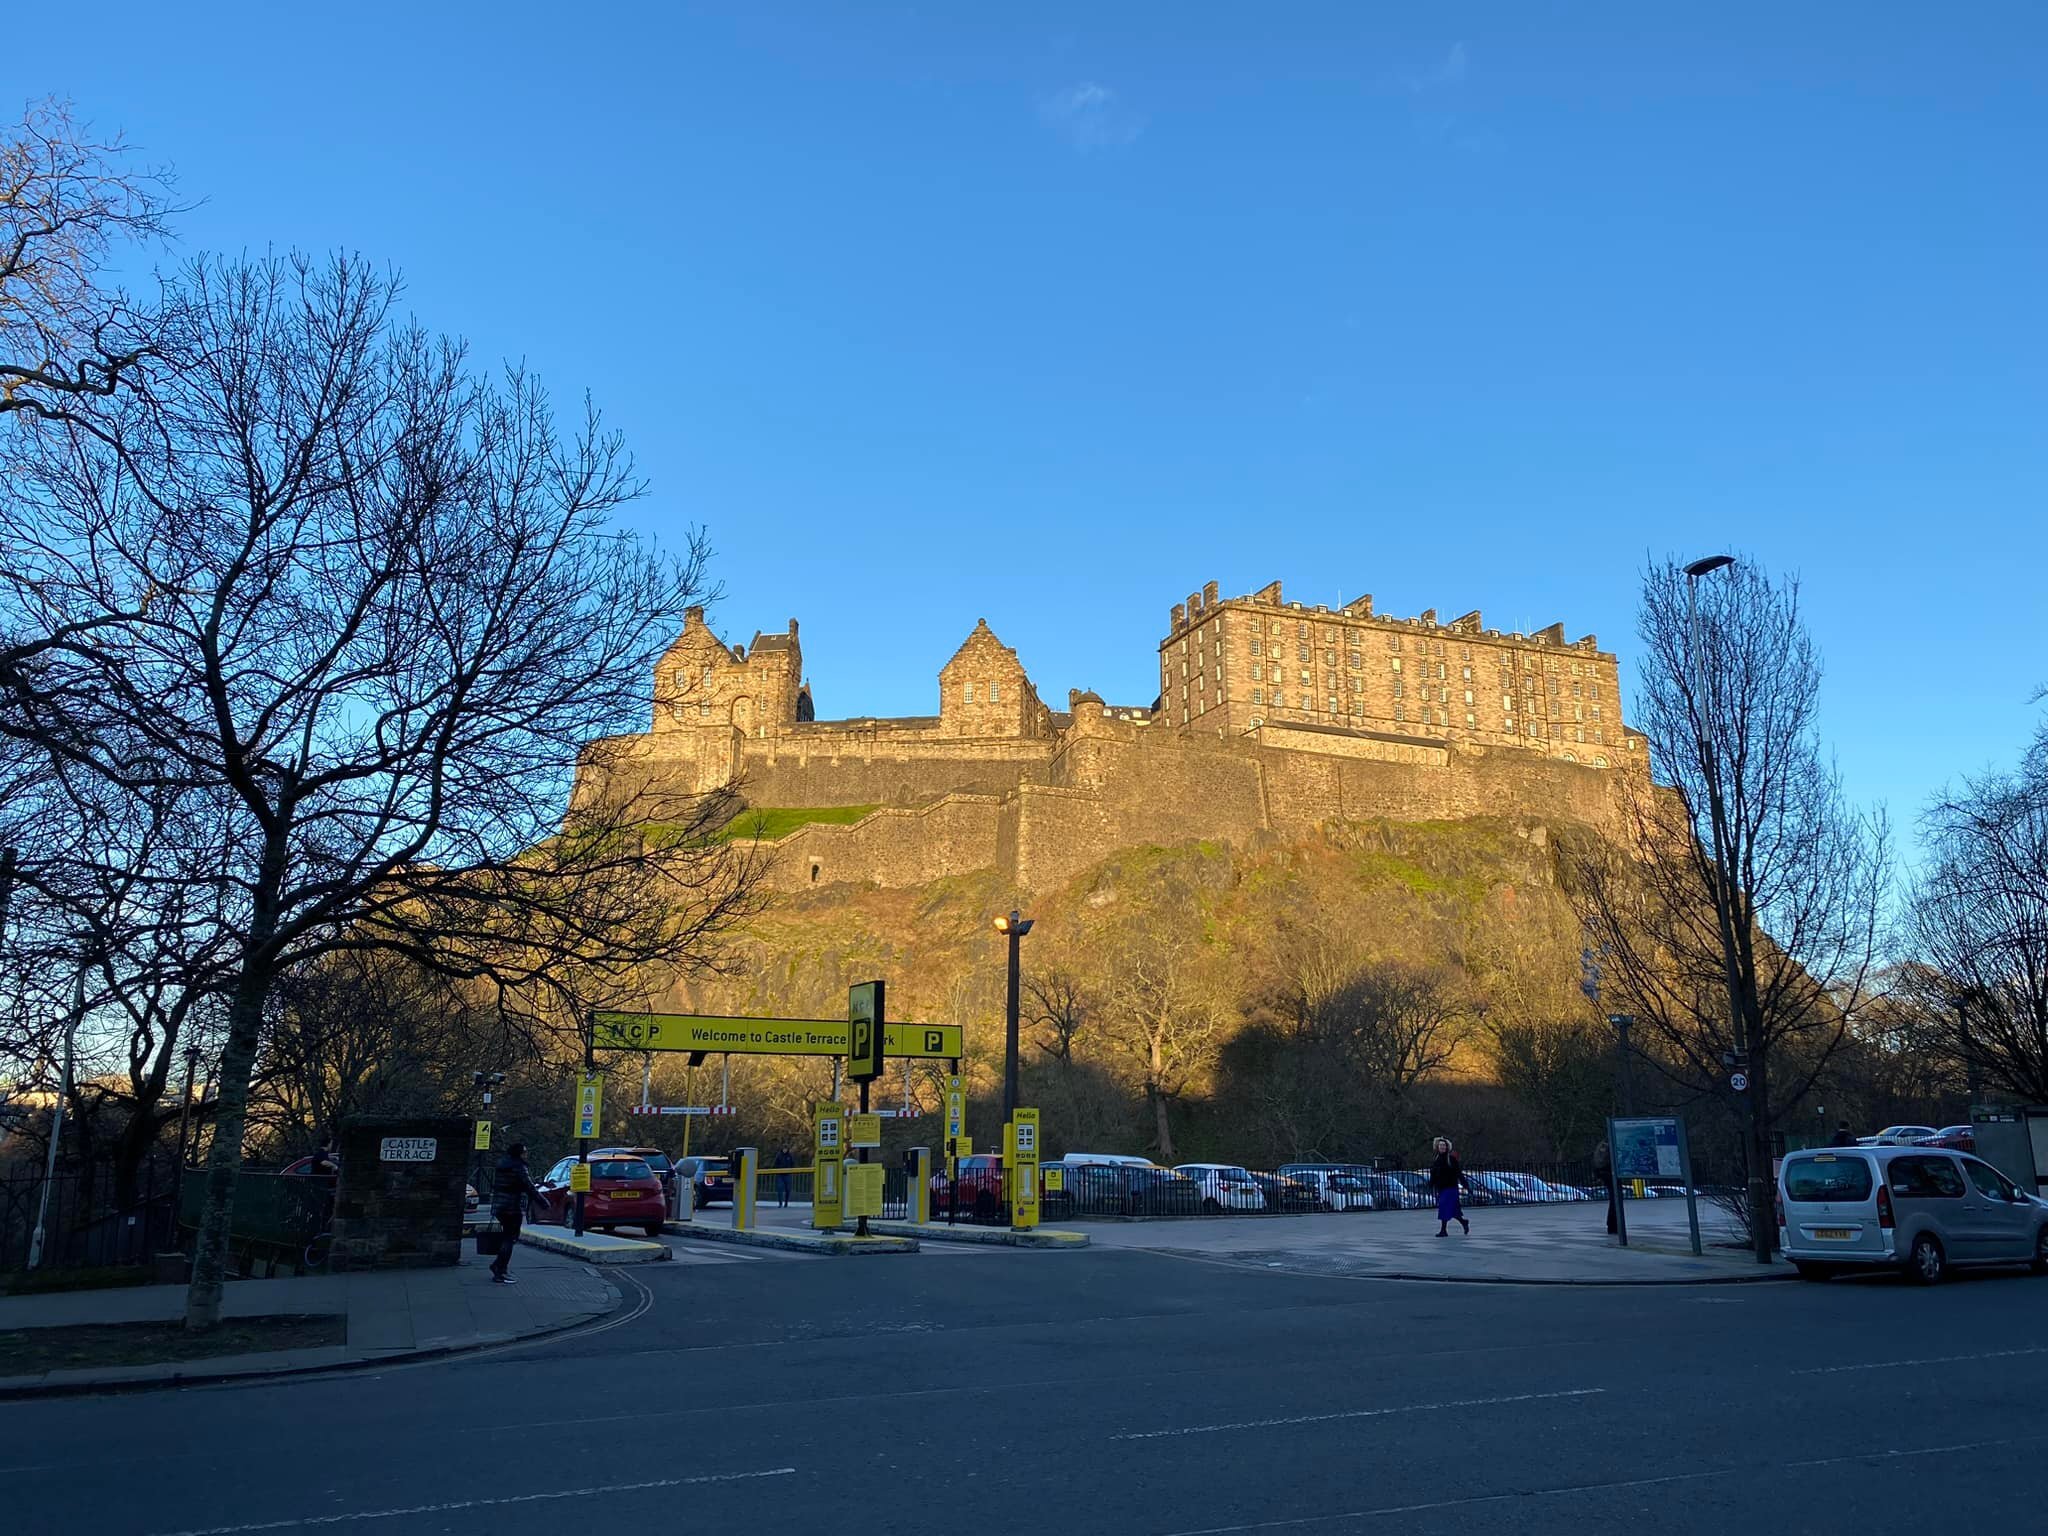 So uplifting to hear so many highly committed young musicians here in Edinburgh.  Here&rsquo;s the view from the Festival venue taken this afternoon plus two photos I took this eve in on way back to accommodation.